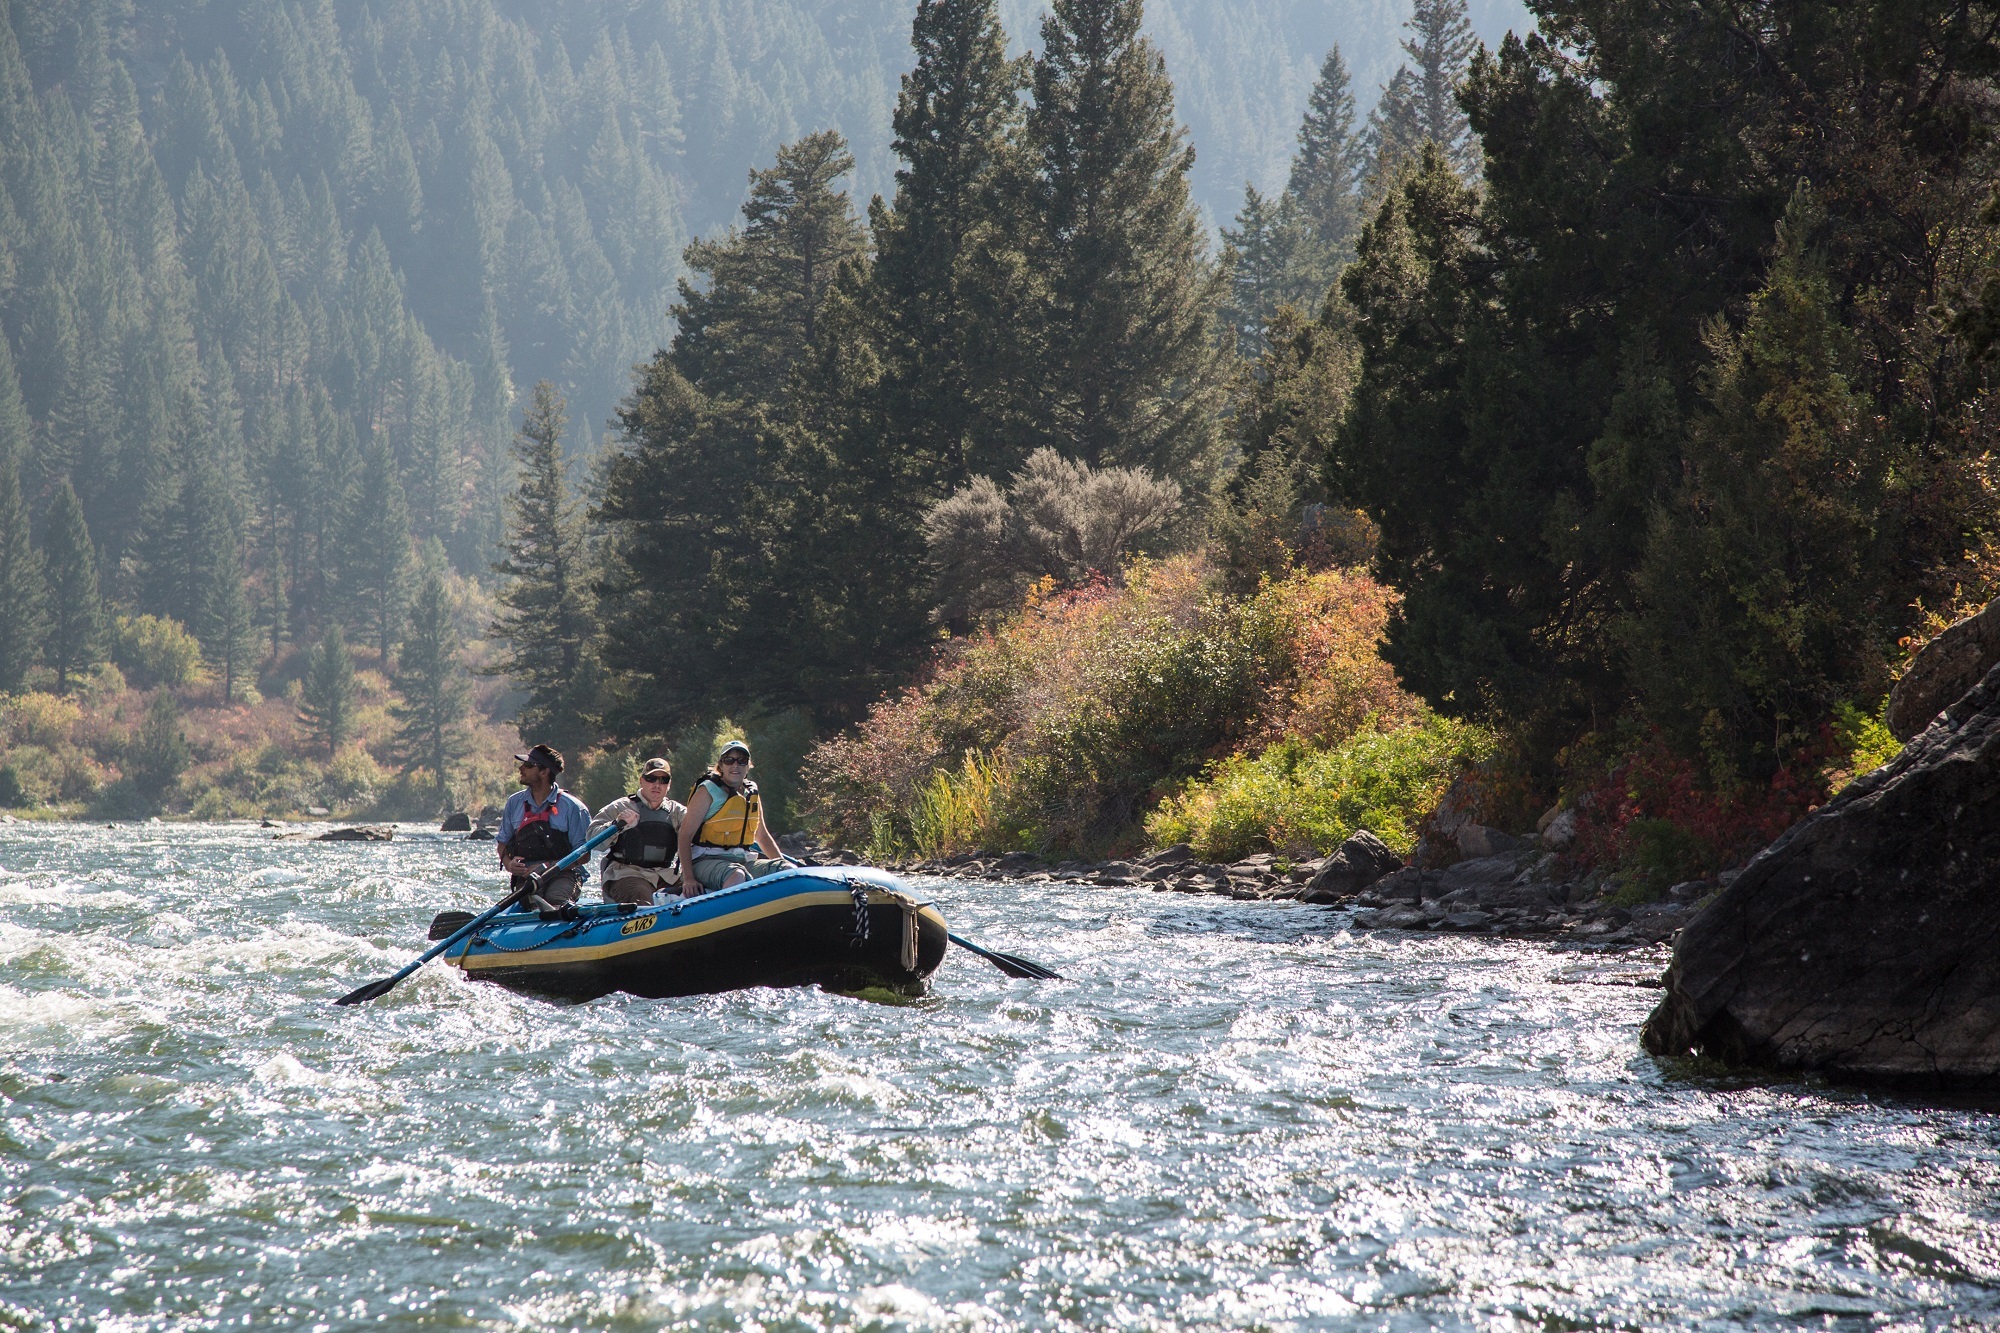 Rafting in the running water photo